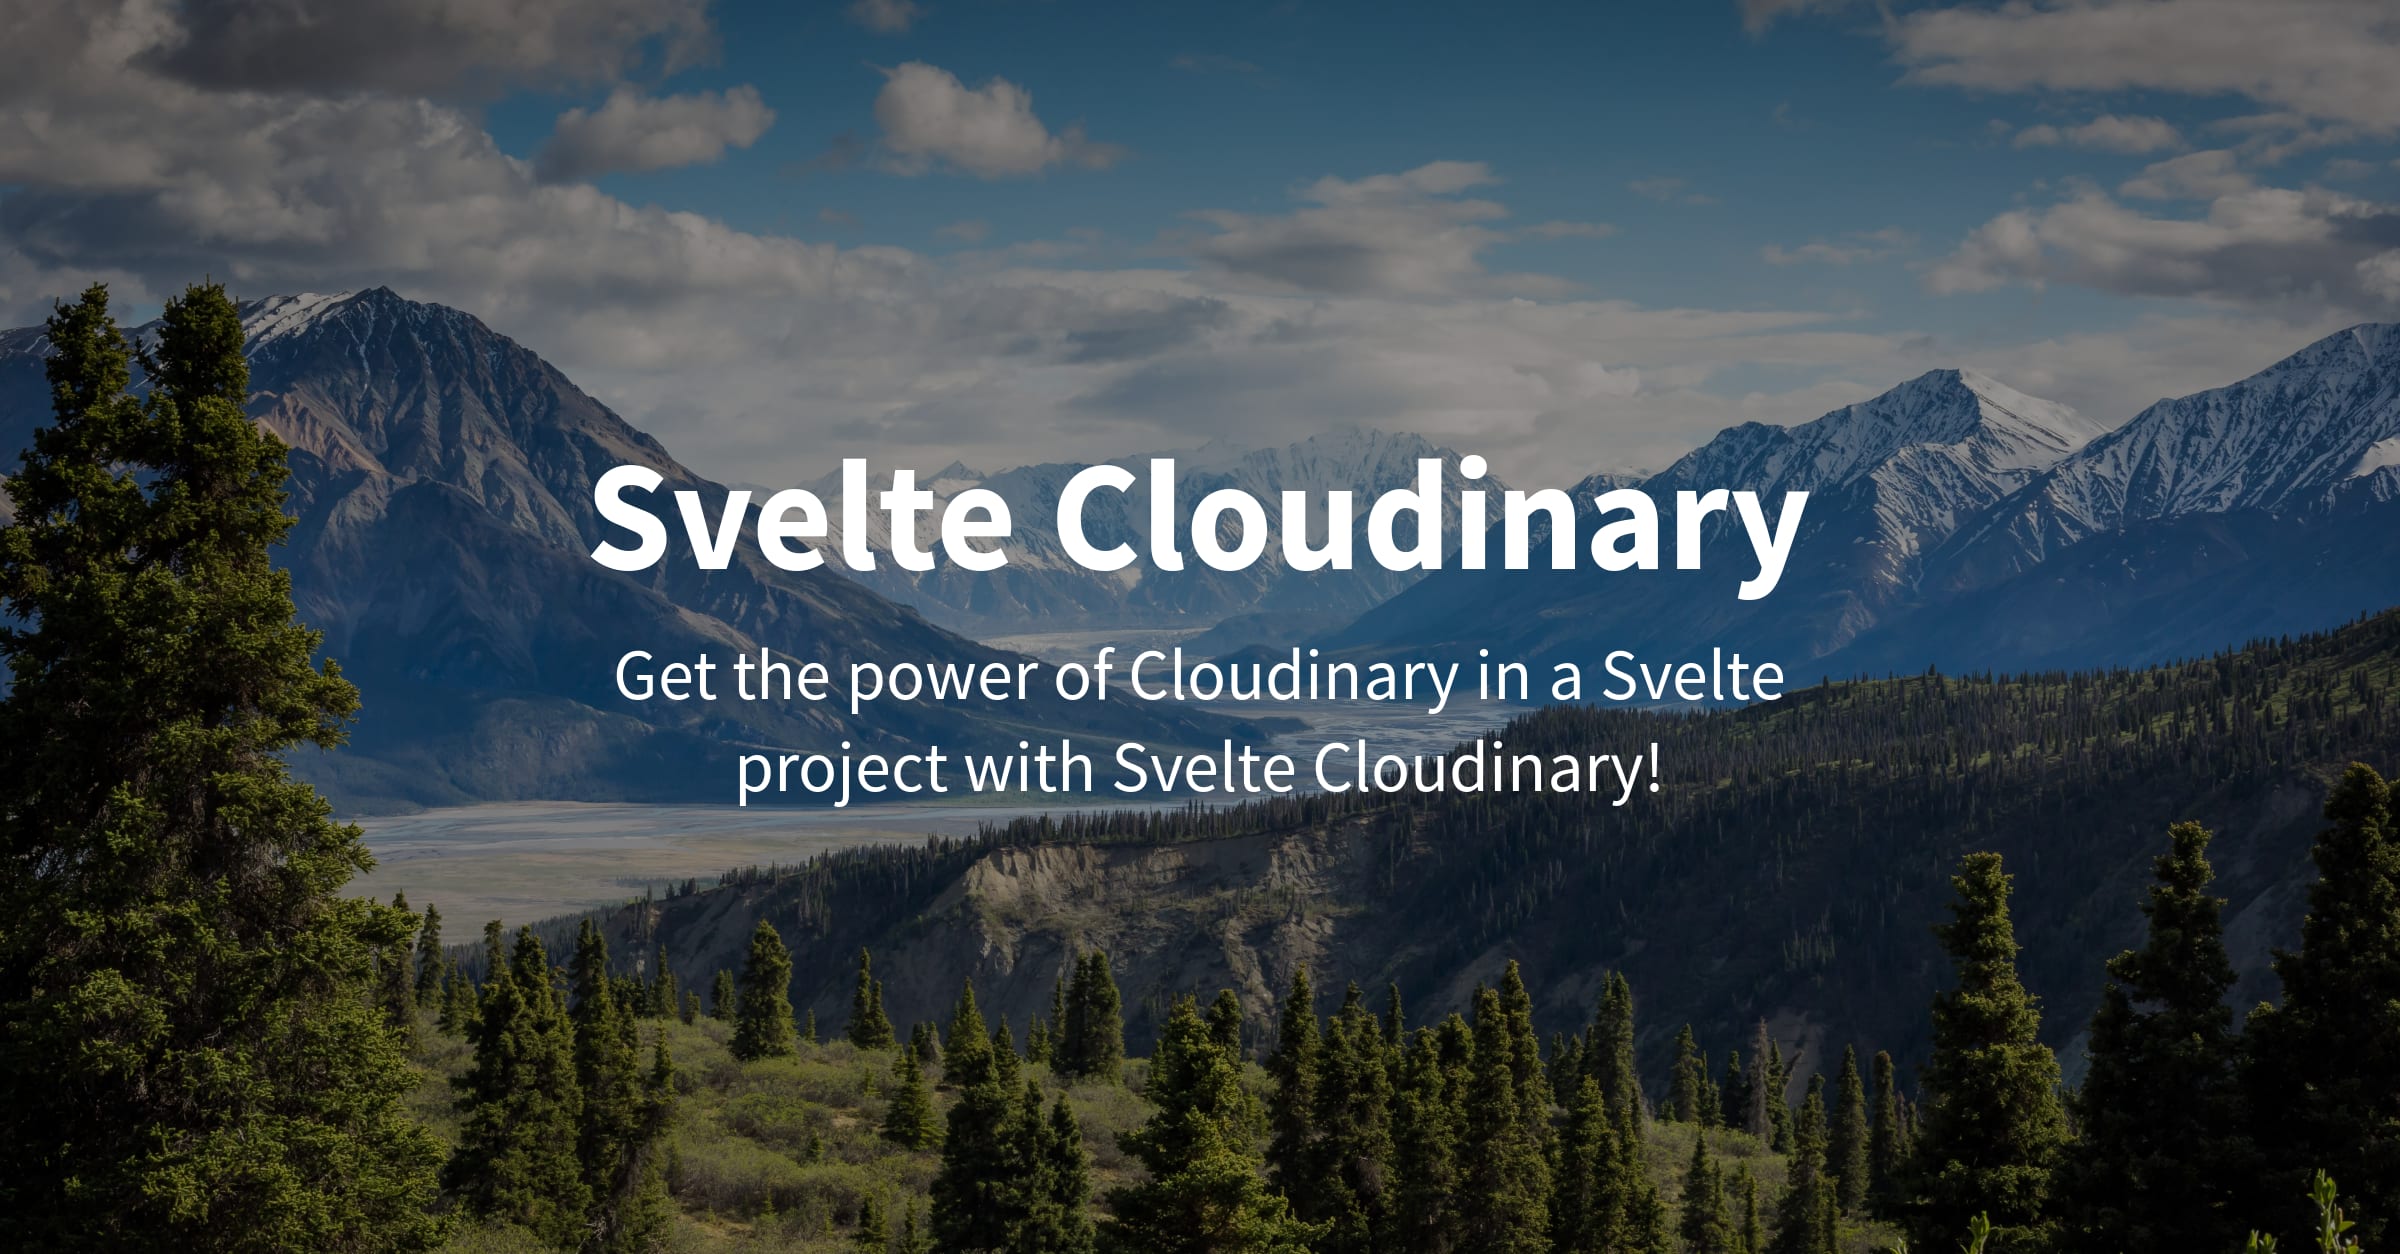 Svelte Cloudinary with picture of a mountain